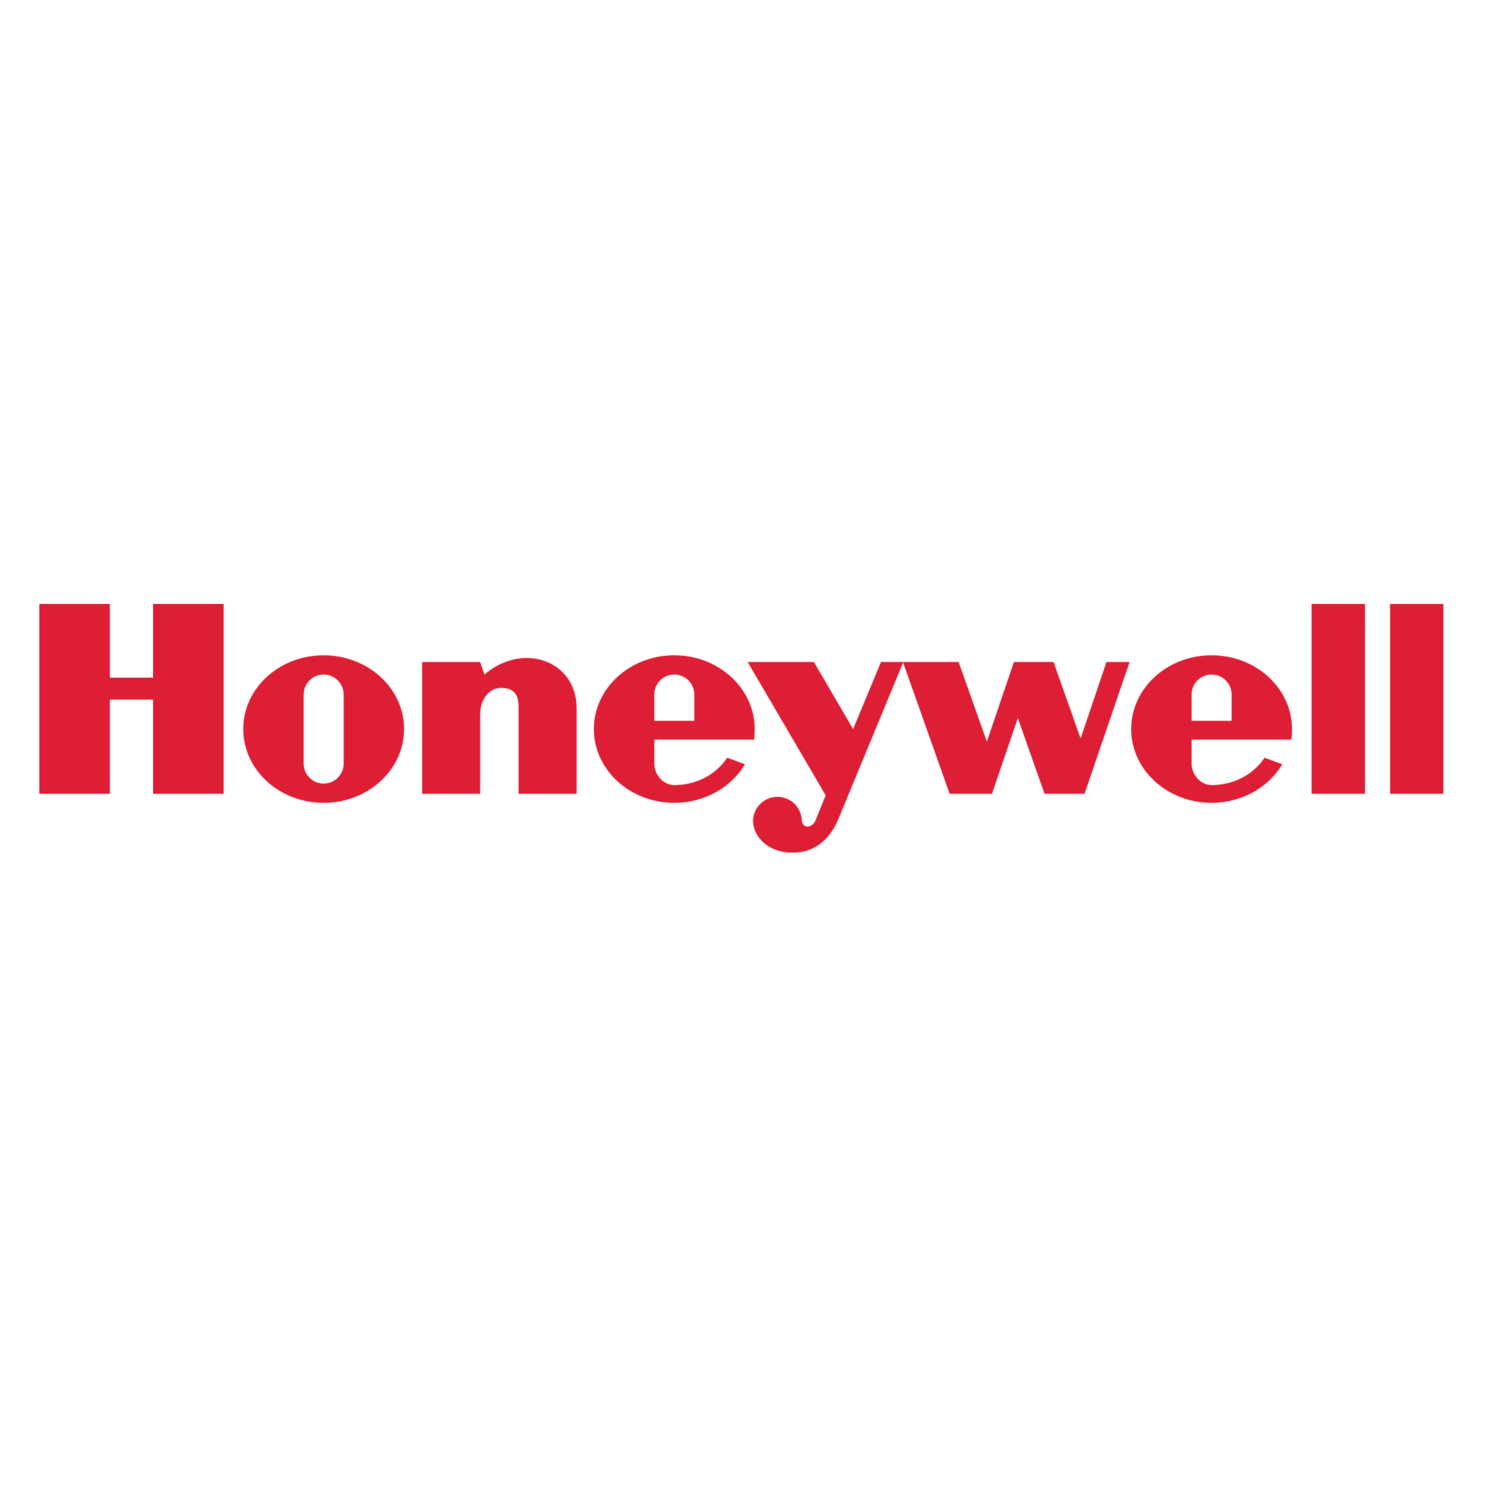 <span style="font-weight: bold;">Honeywell</span>